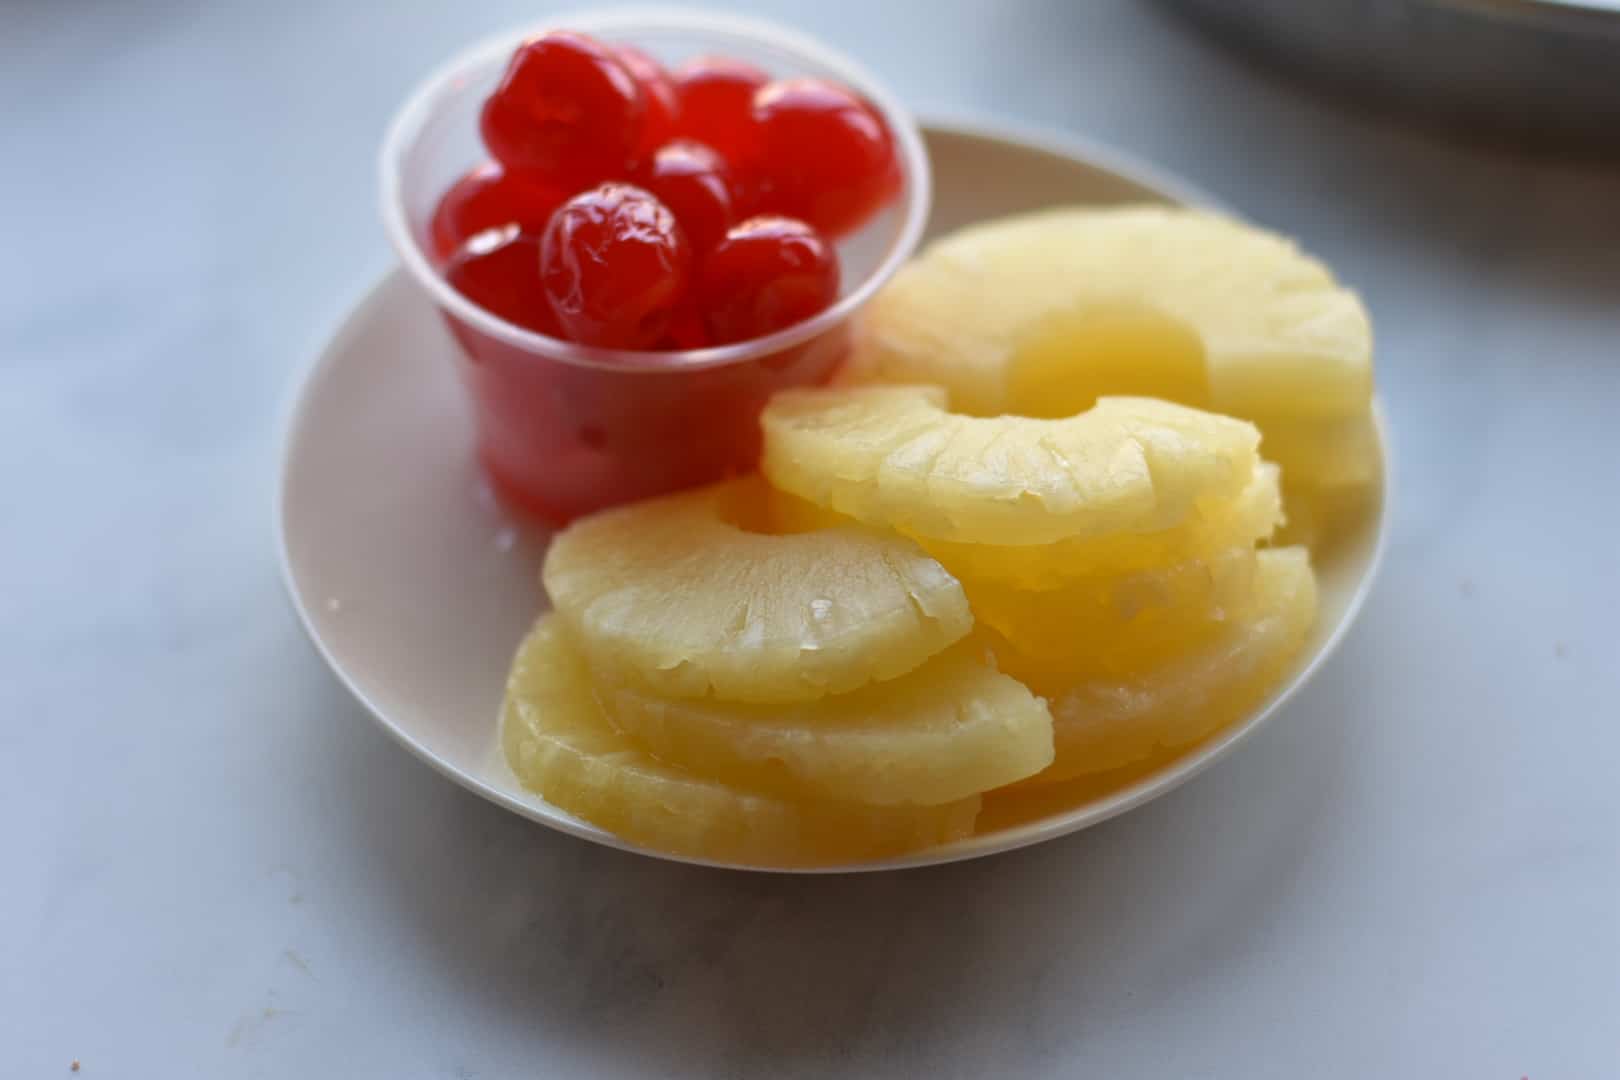 ingredients for a pineapple upside down cake